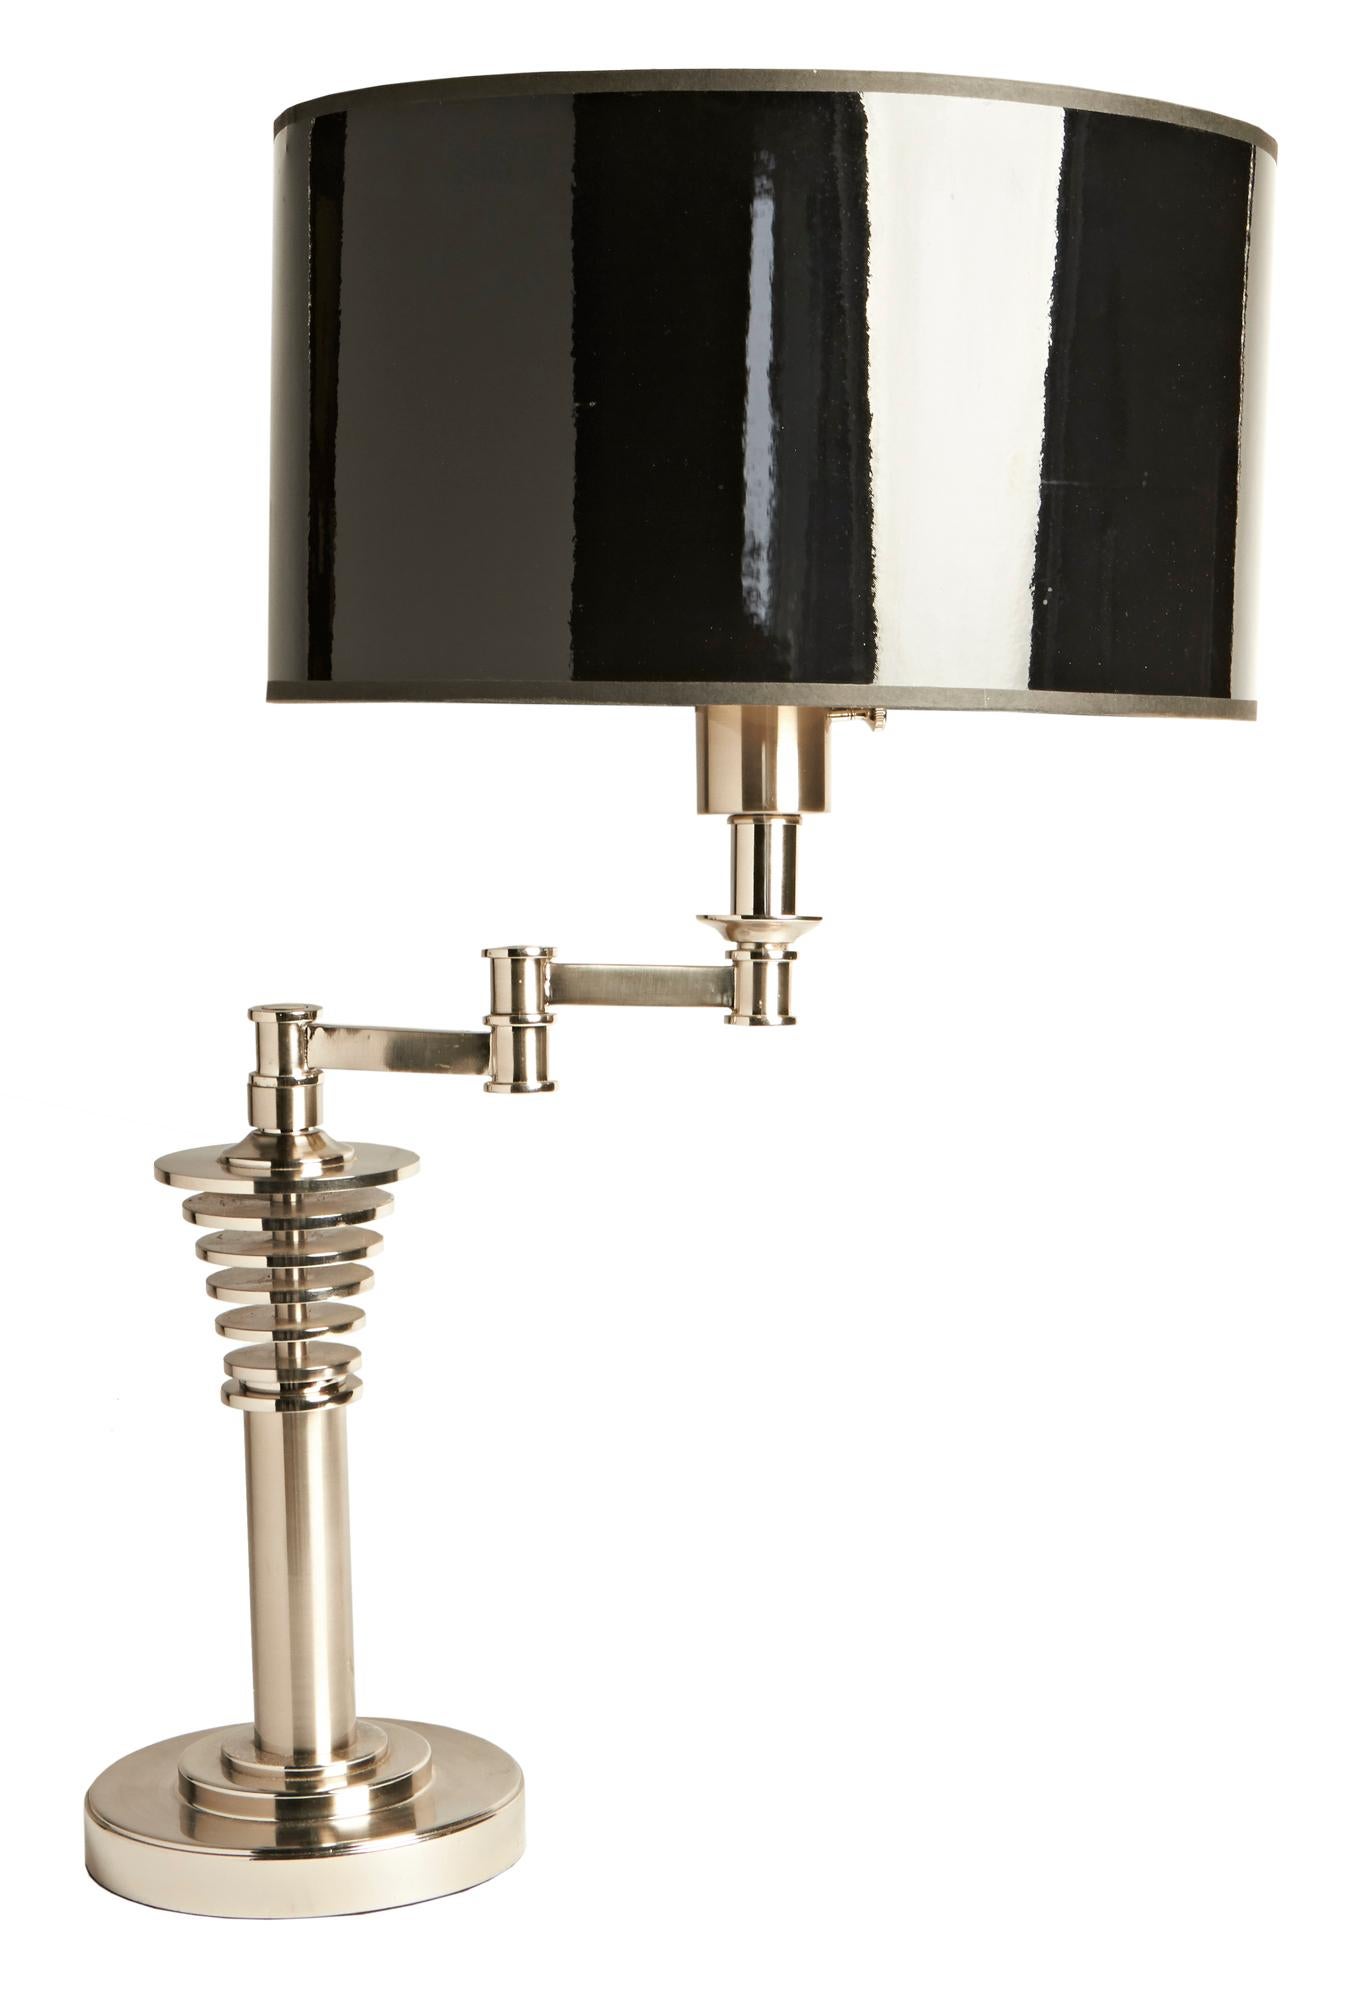 This impressive American Postmodern swing arm desk lamp has all the design features of the Machine Age but with a modern twist. It is executed in brushed steel and polished chrome and is in near mint condition. ( The contemporary shade shown is for